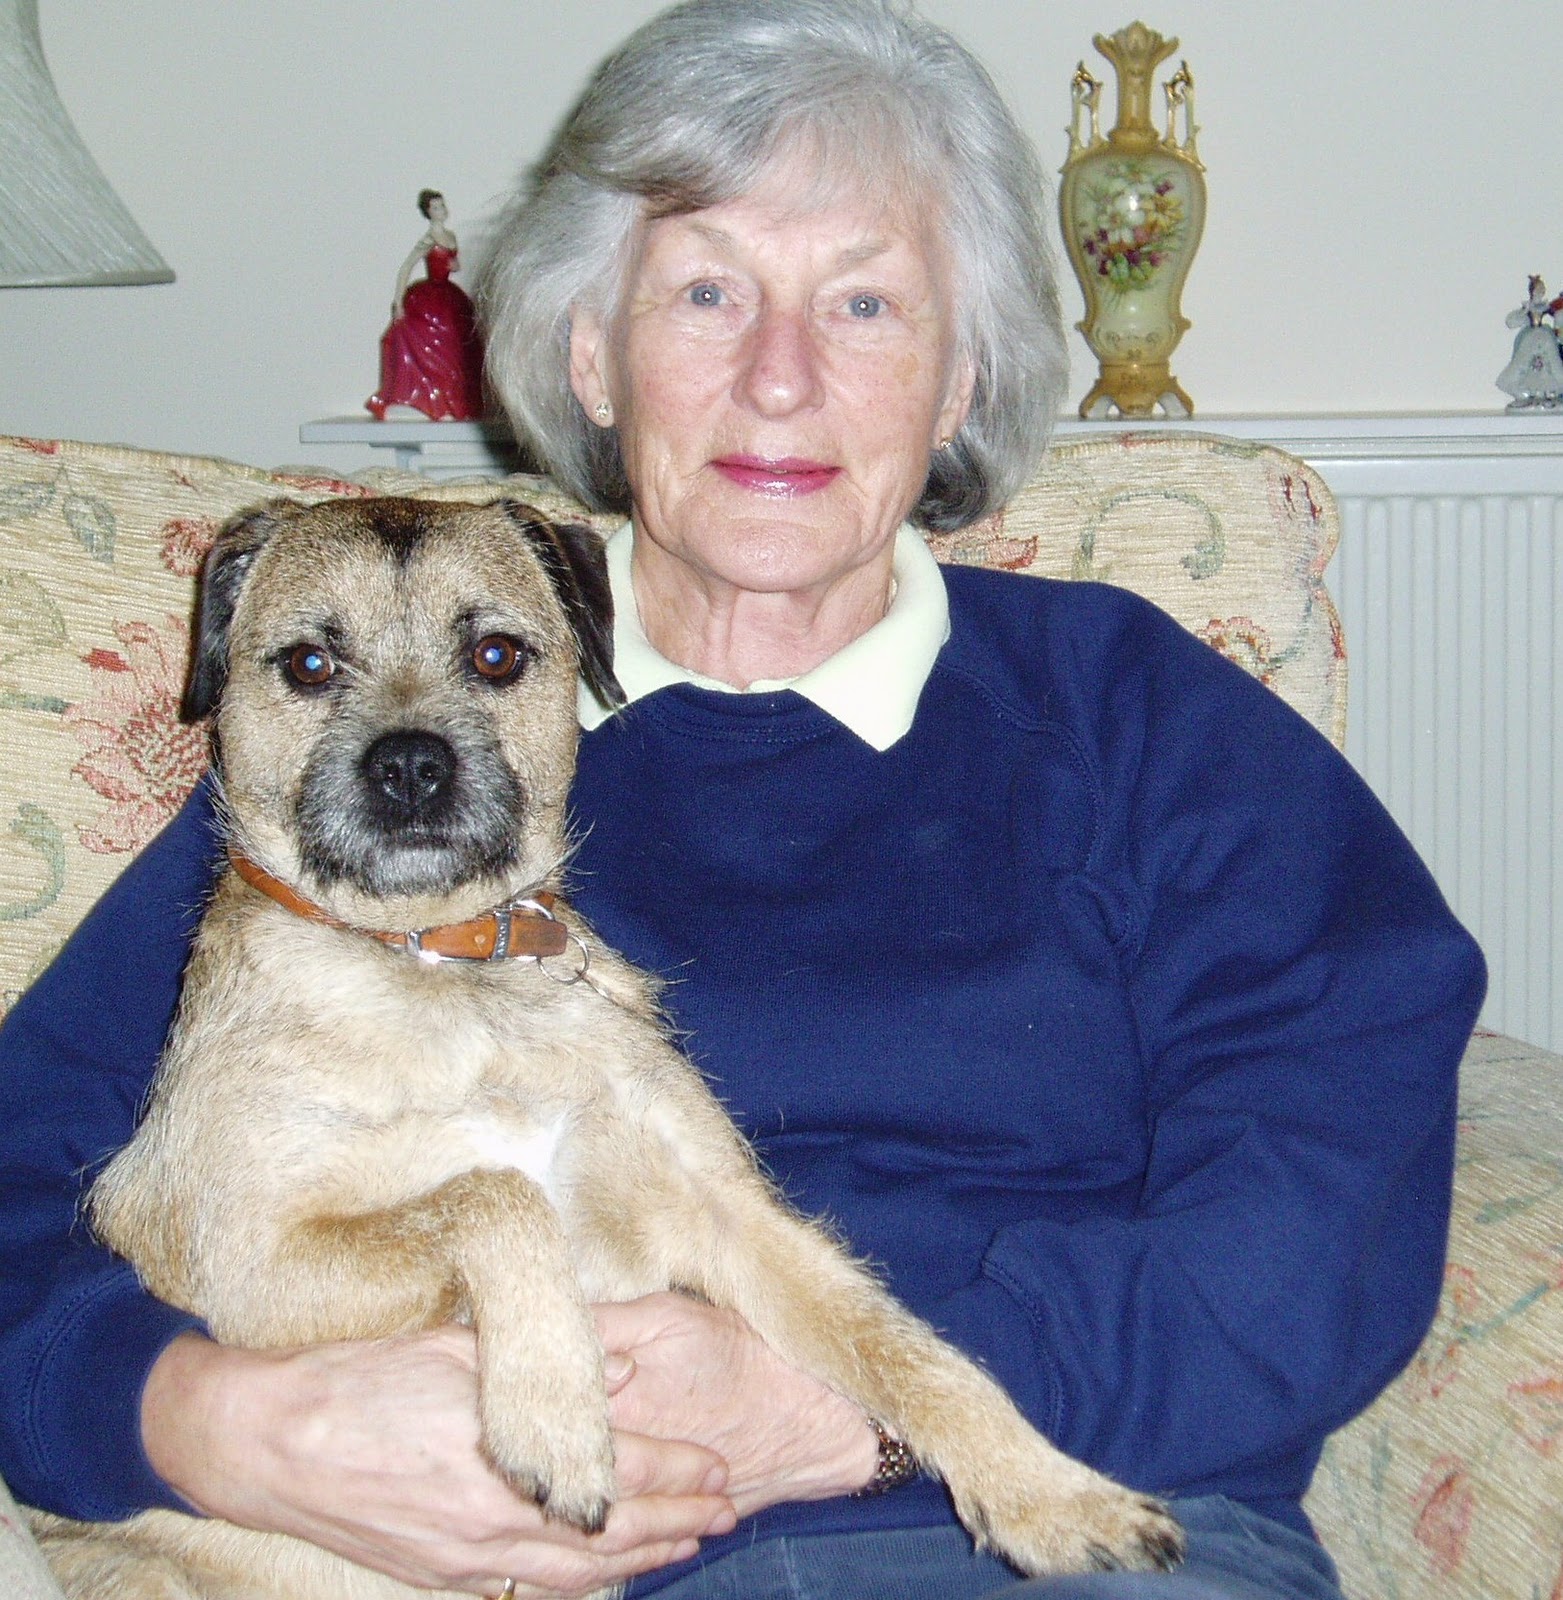 Holiday Dogs News: Meet the Holiday Dogs Host Carers!